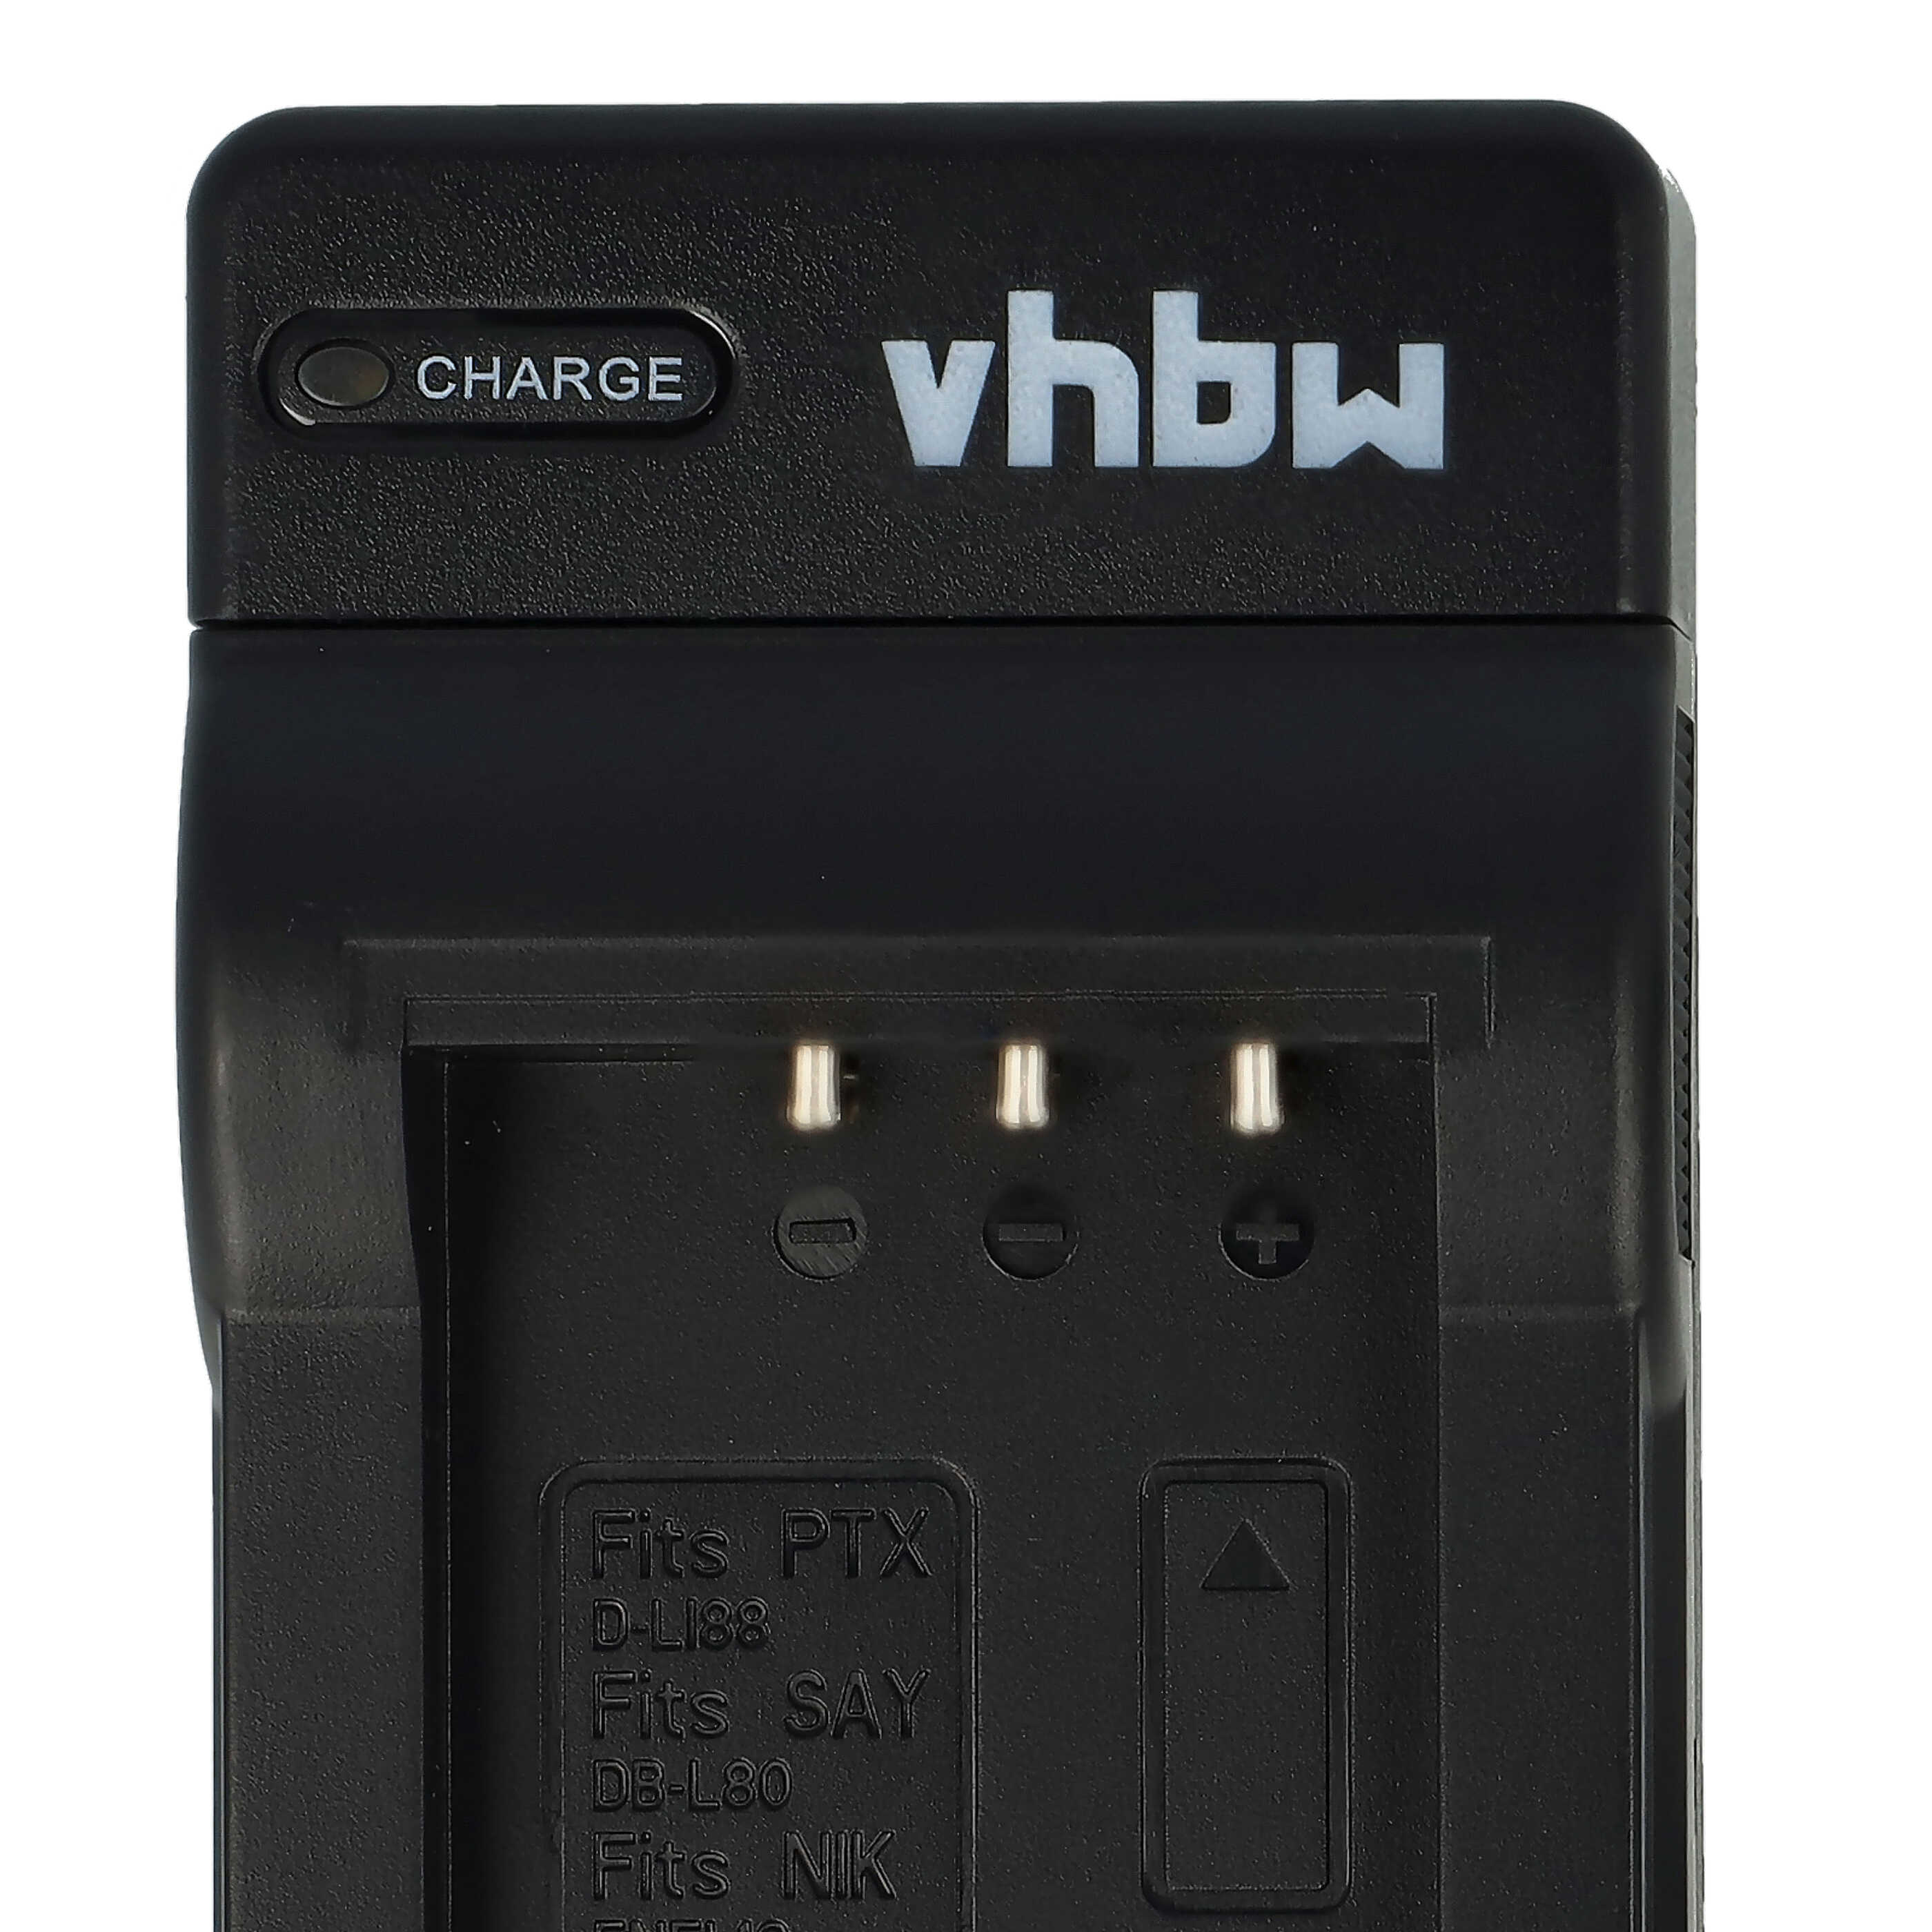 Battery Charger suitable for Coolpix W100 Camera etc. - 0.5 A, 4.2 V